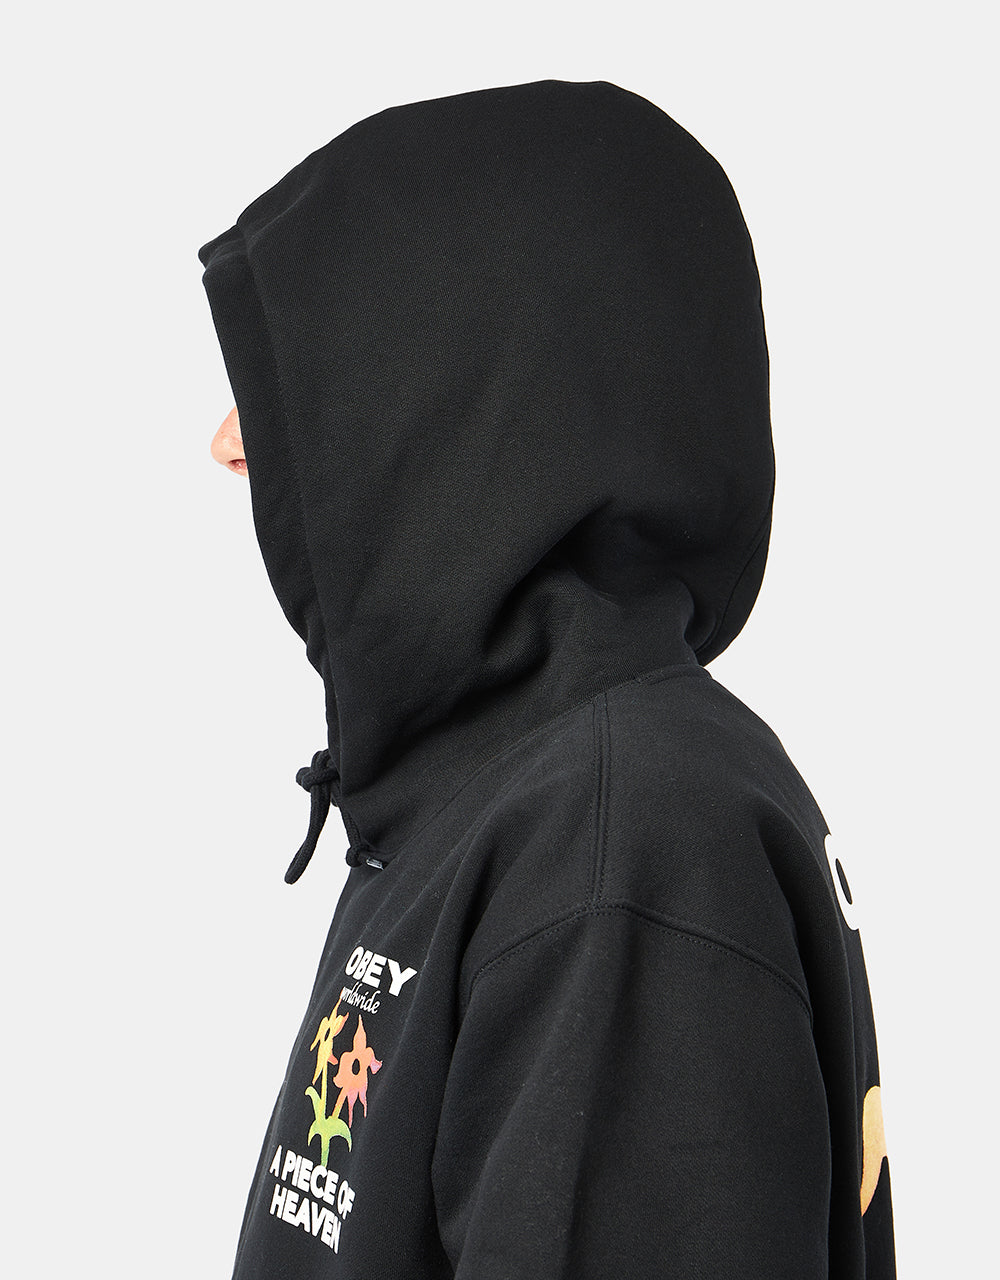 Obey A Piece Of Heaven Pullover Hoodie - Black